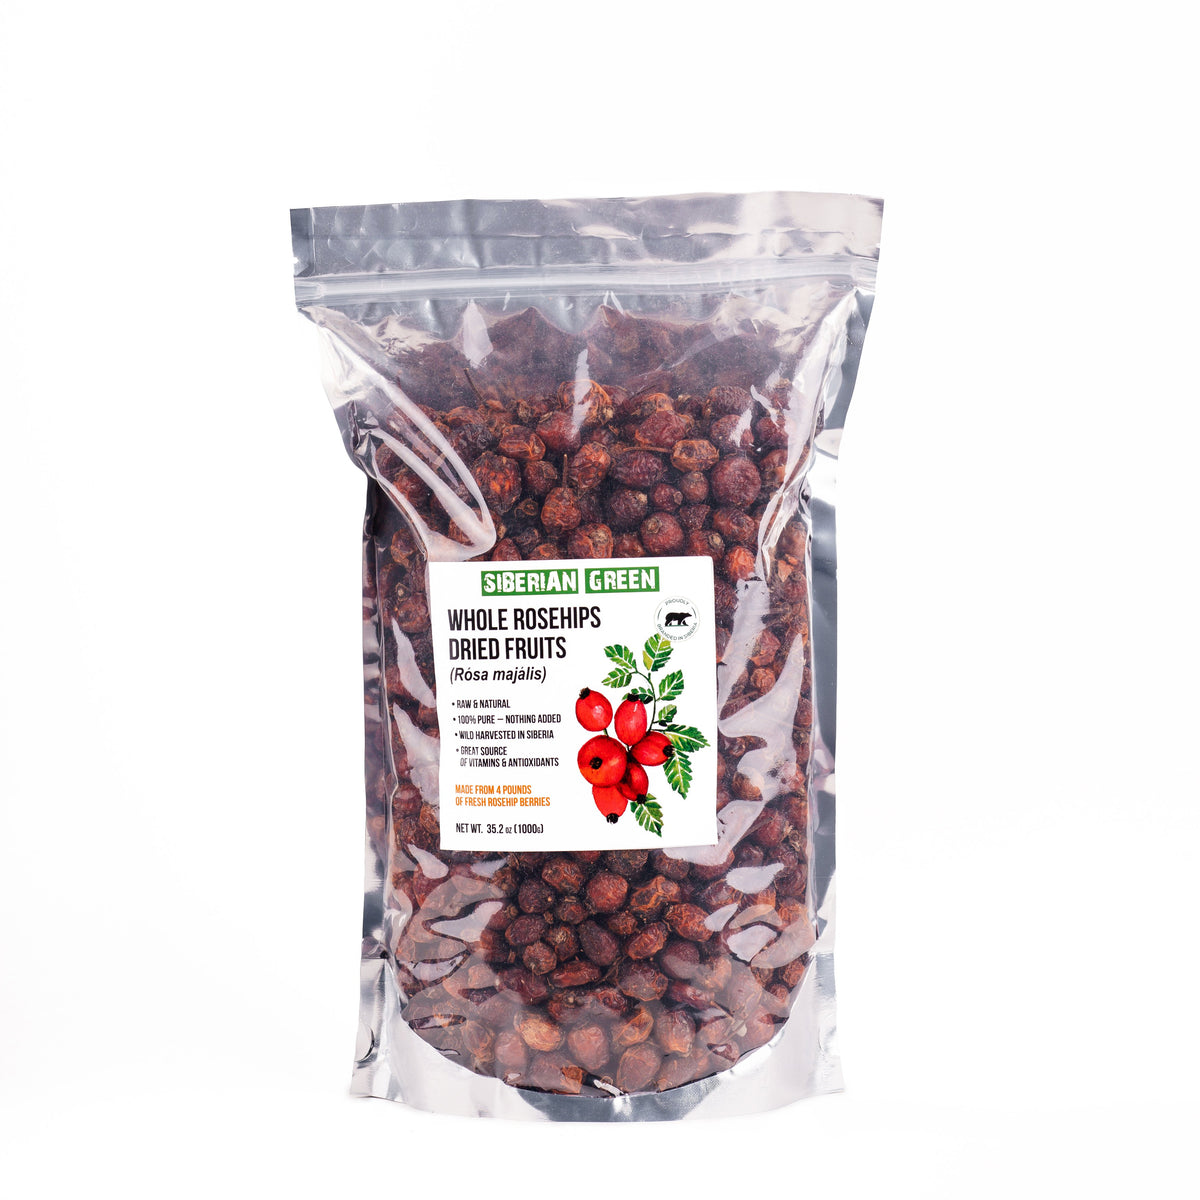 Siberian Dried Rose Hips Whole Seeds 1 kg (2.2 pounds) - Rosehips Herbal Tea Directly from Siberia Altai Mountains and Taiga